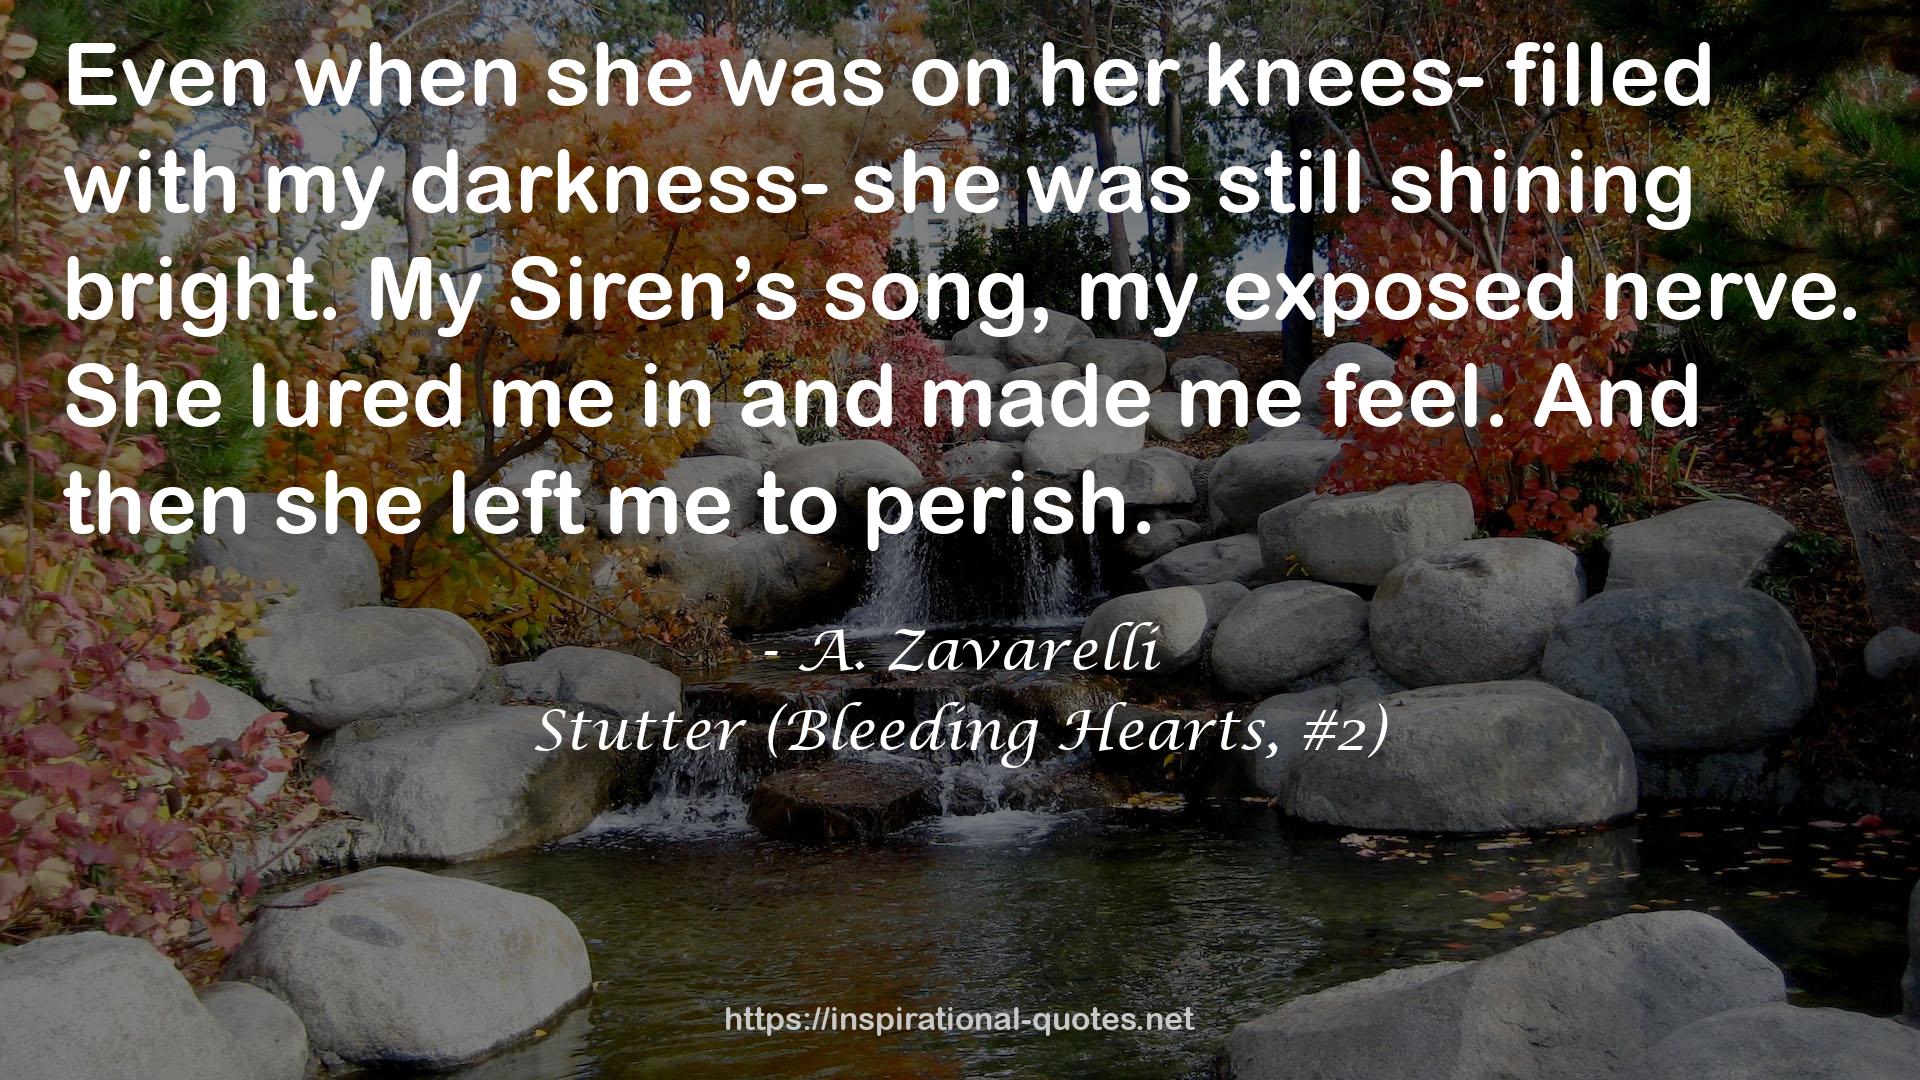 my darkness-  QUOTES